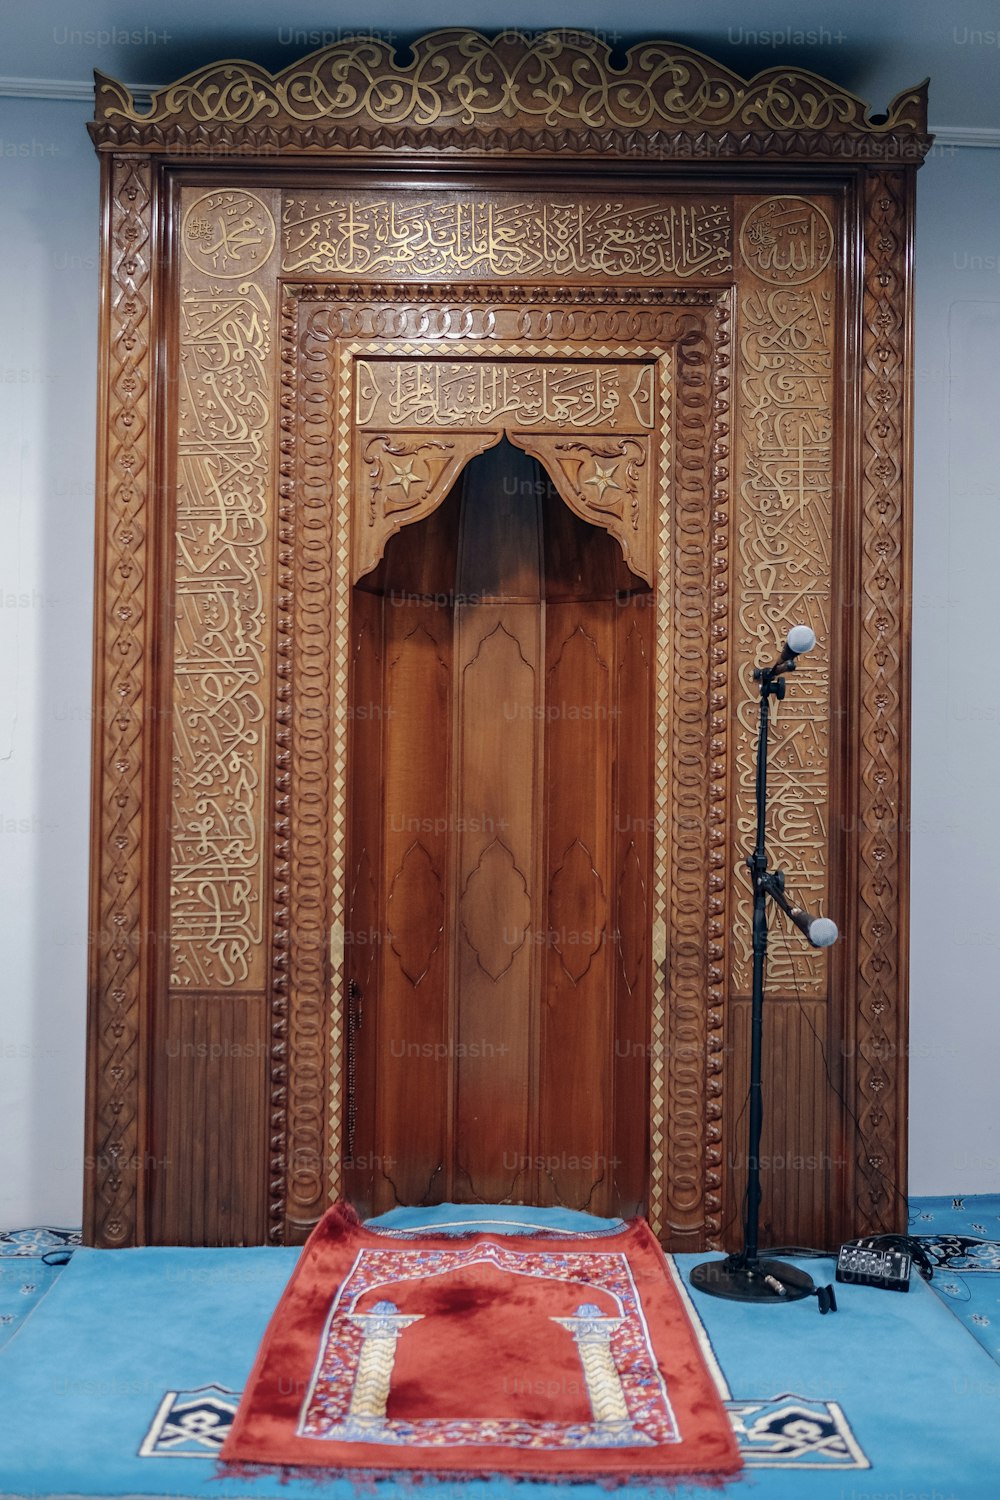 a wooden door with a red rug in front of it